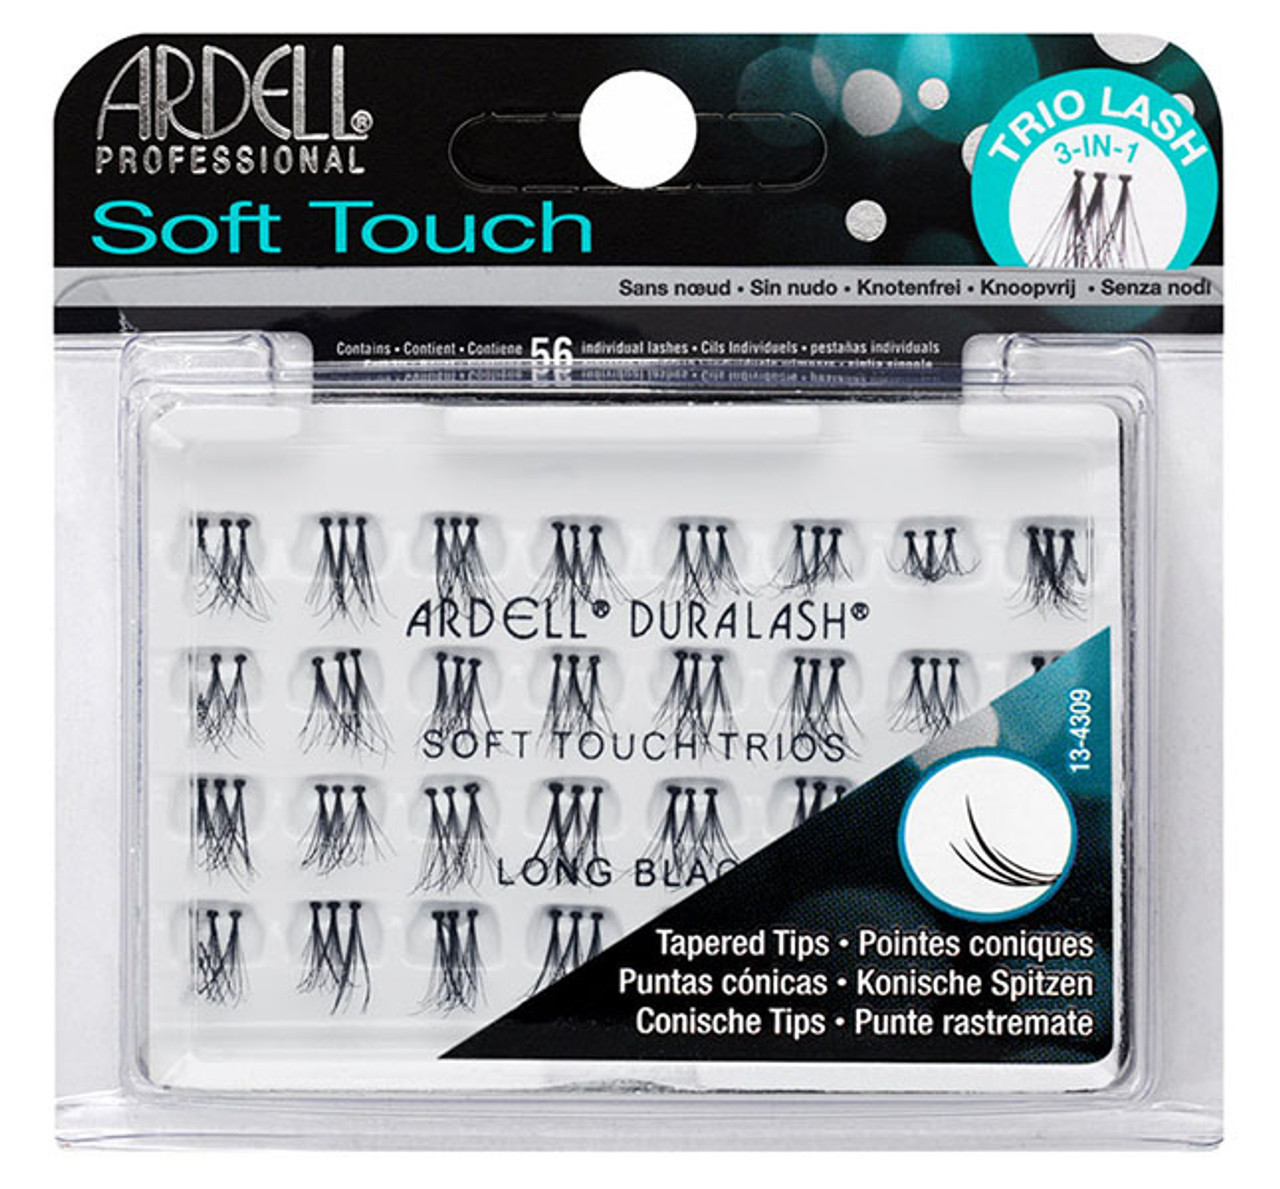 Ardell Duralash Soft Touch - Soft Touch Trios Long Black